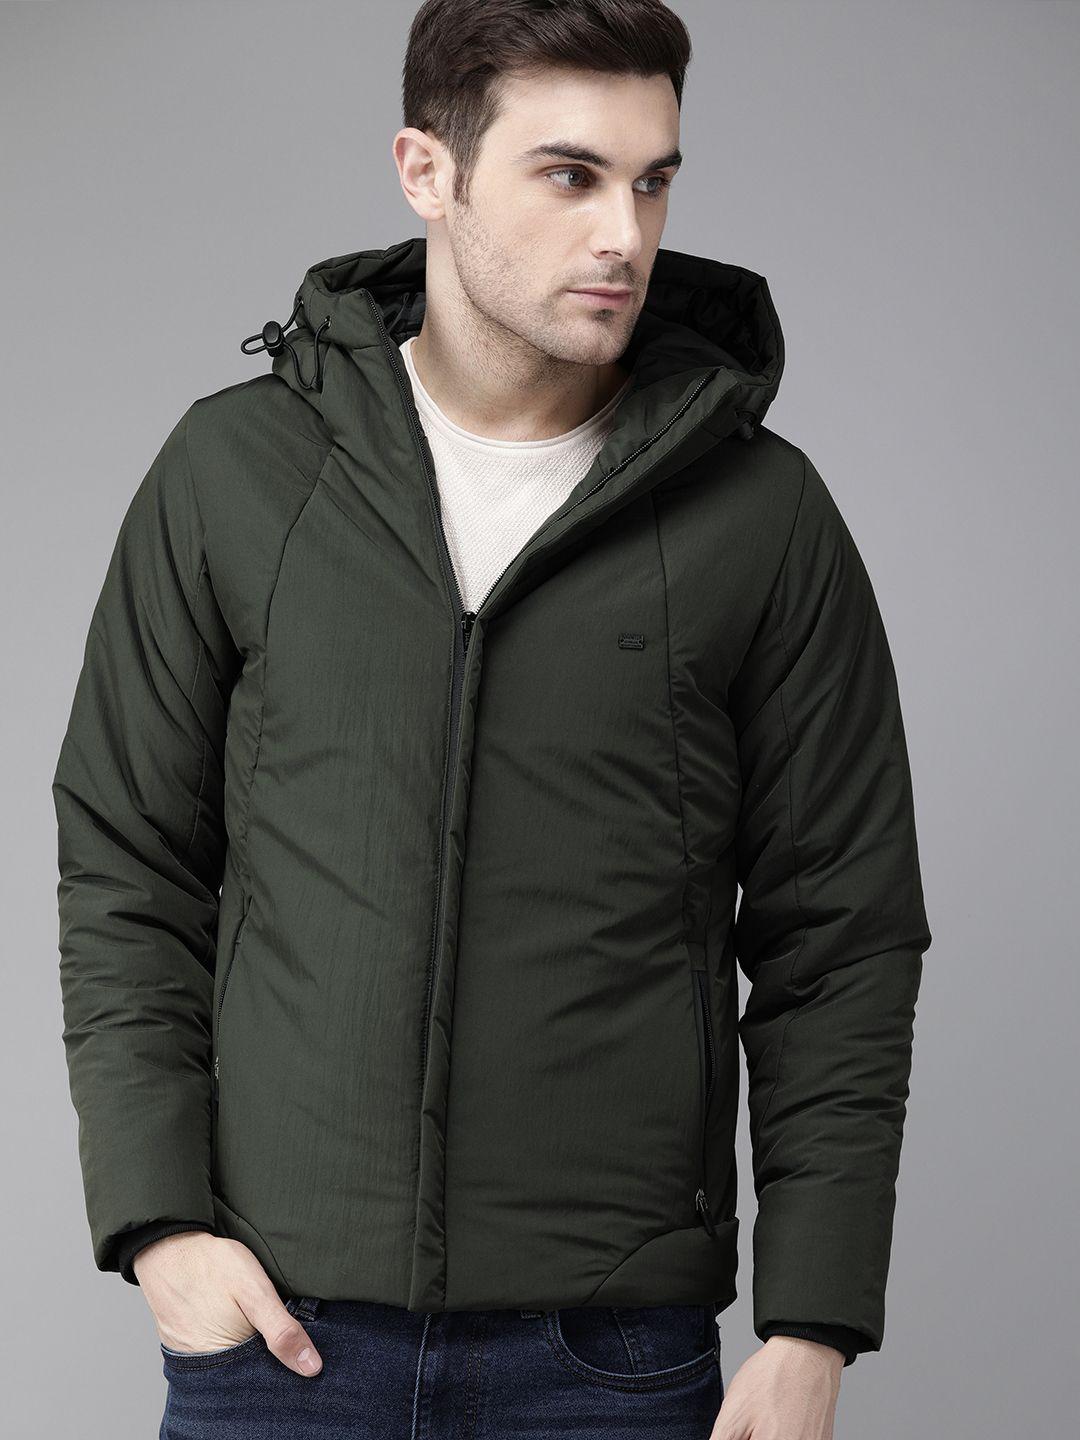 the-roadster-lifestyle-co-men-olive-green-solid-hooded-padded-jacket